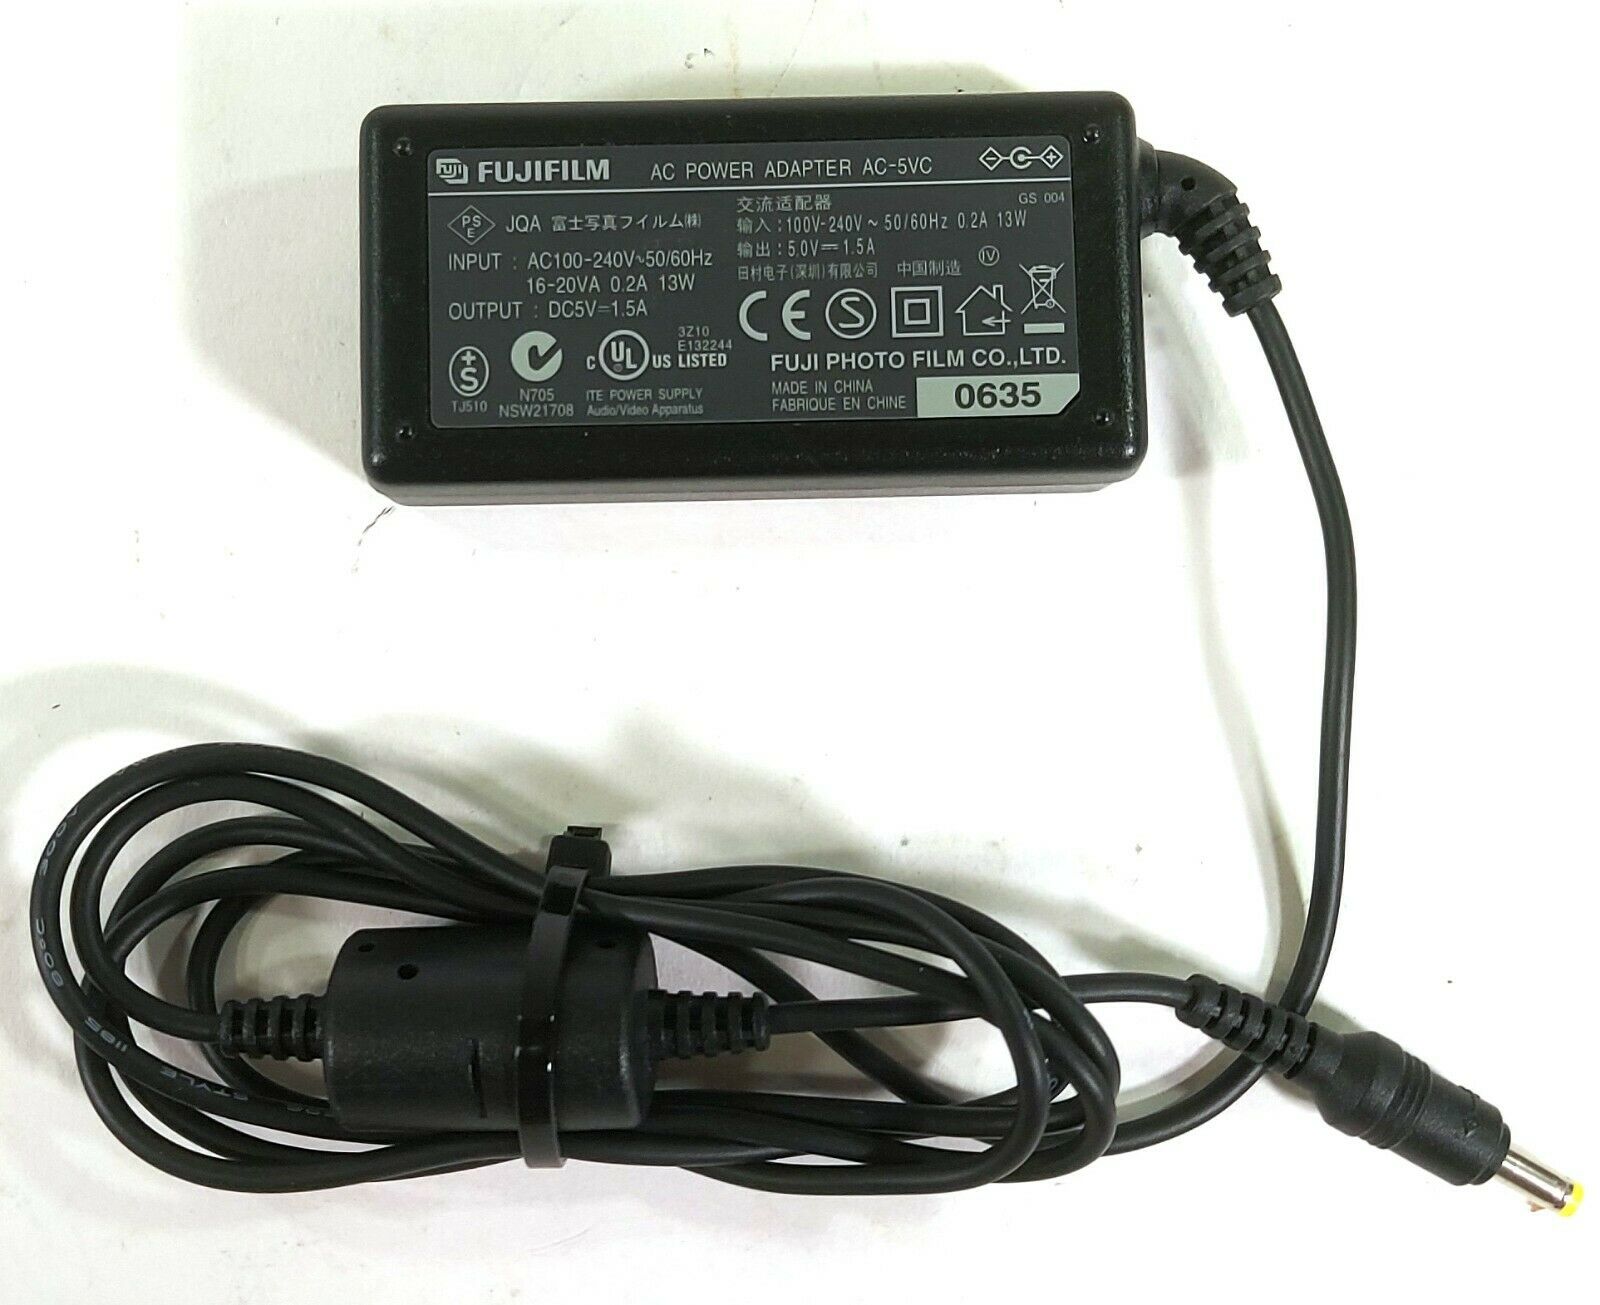 Fujifilm AC-5VC ac/DC Adapter 5V 1.5A Original Charger Power Supply Output Current: 1.5 A Unit Typ - Click Image to Close